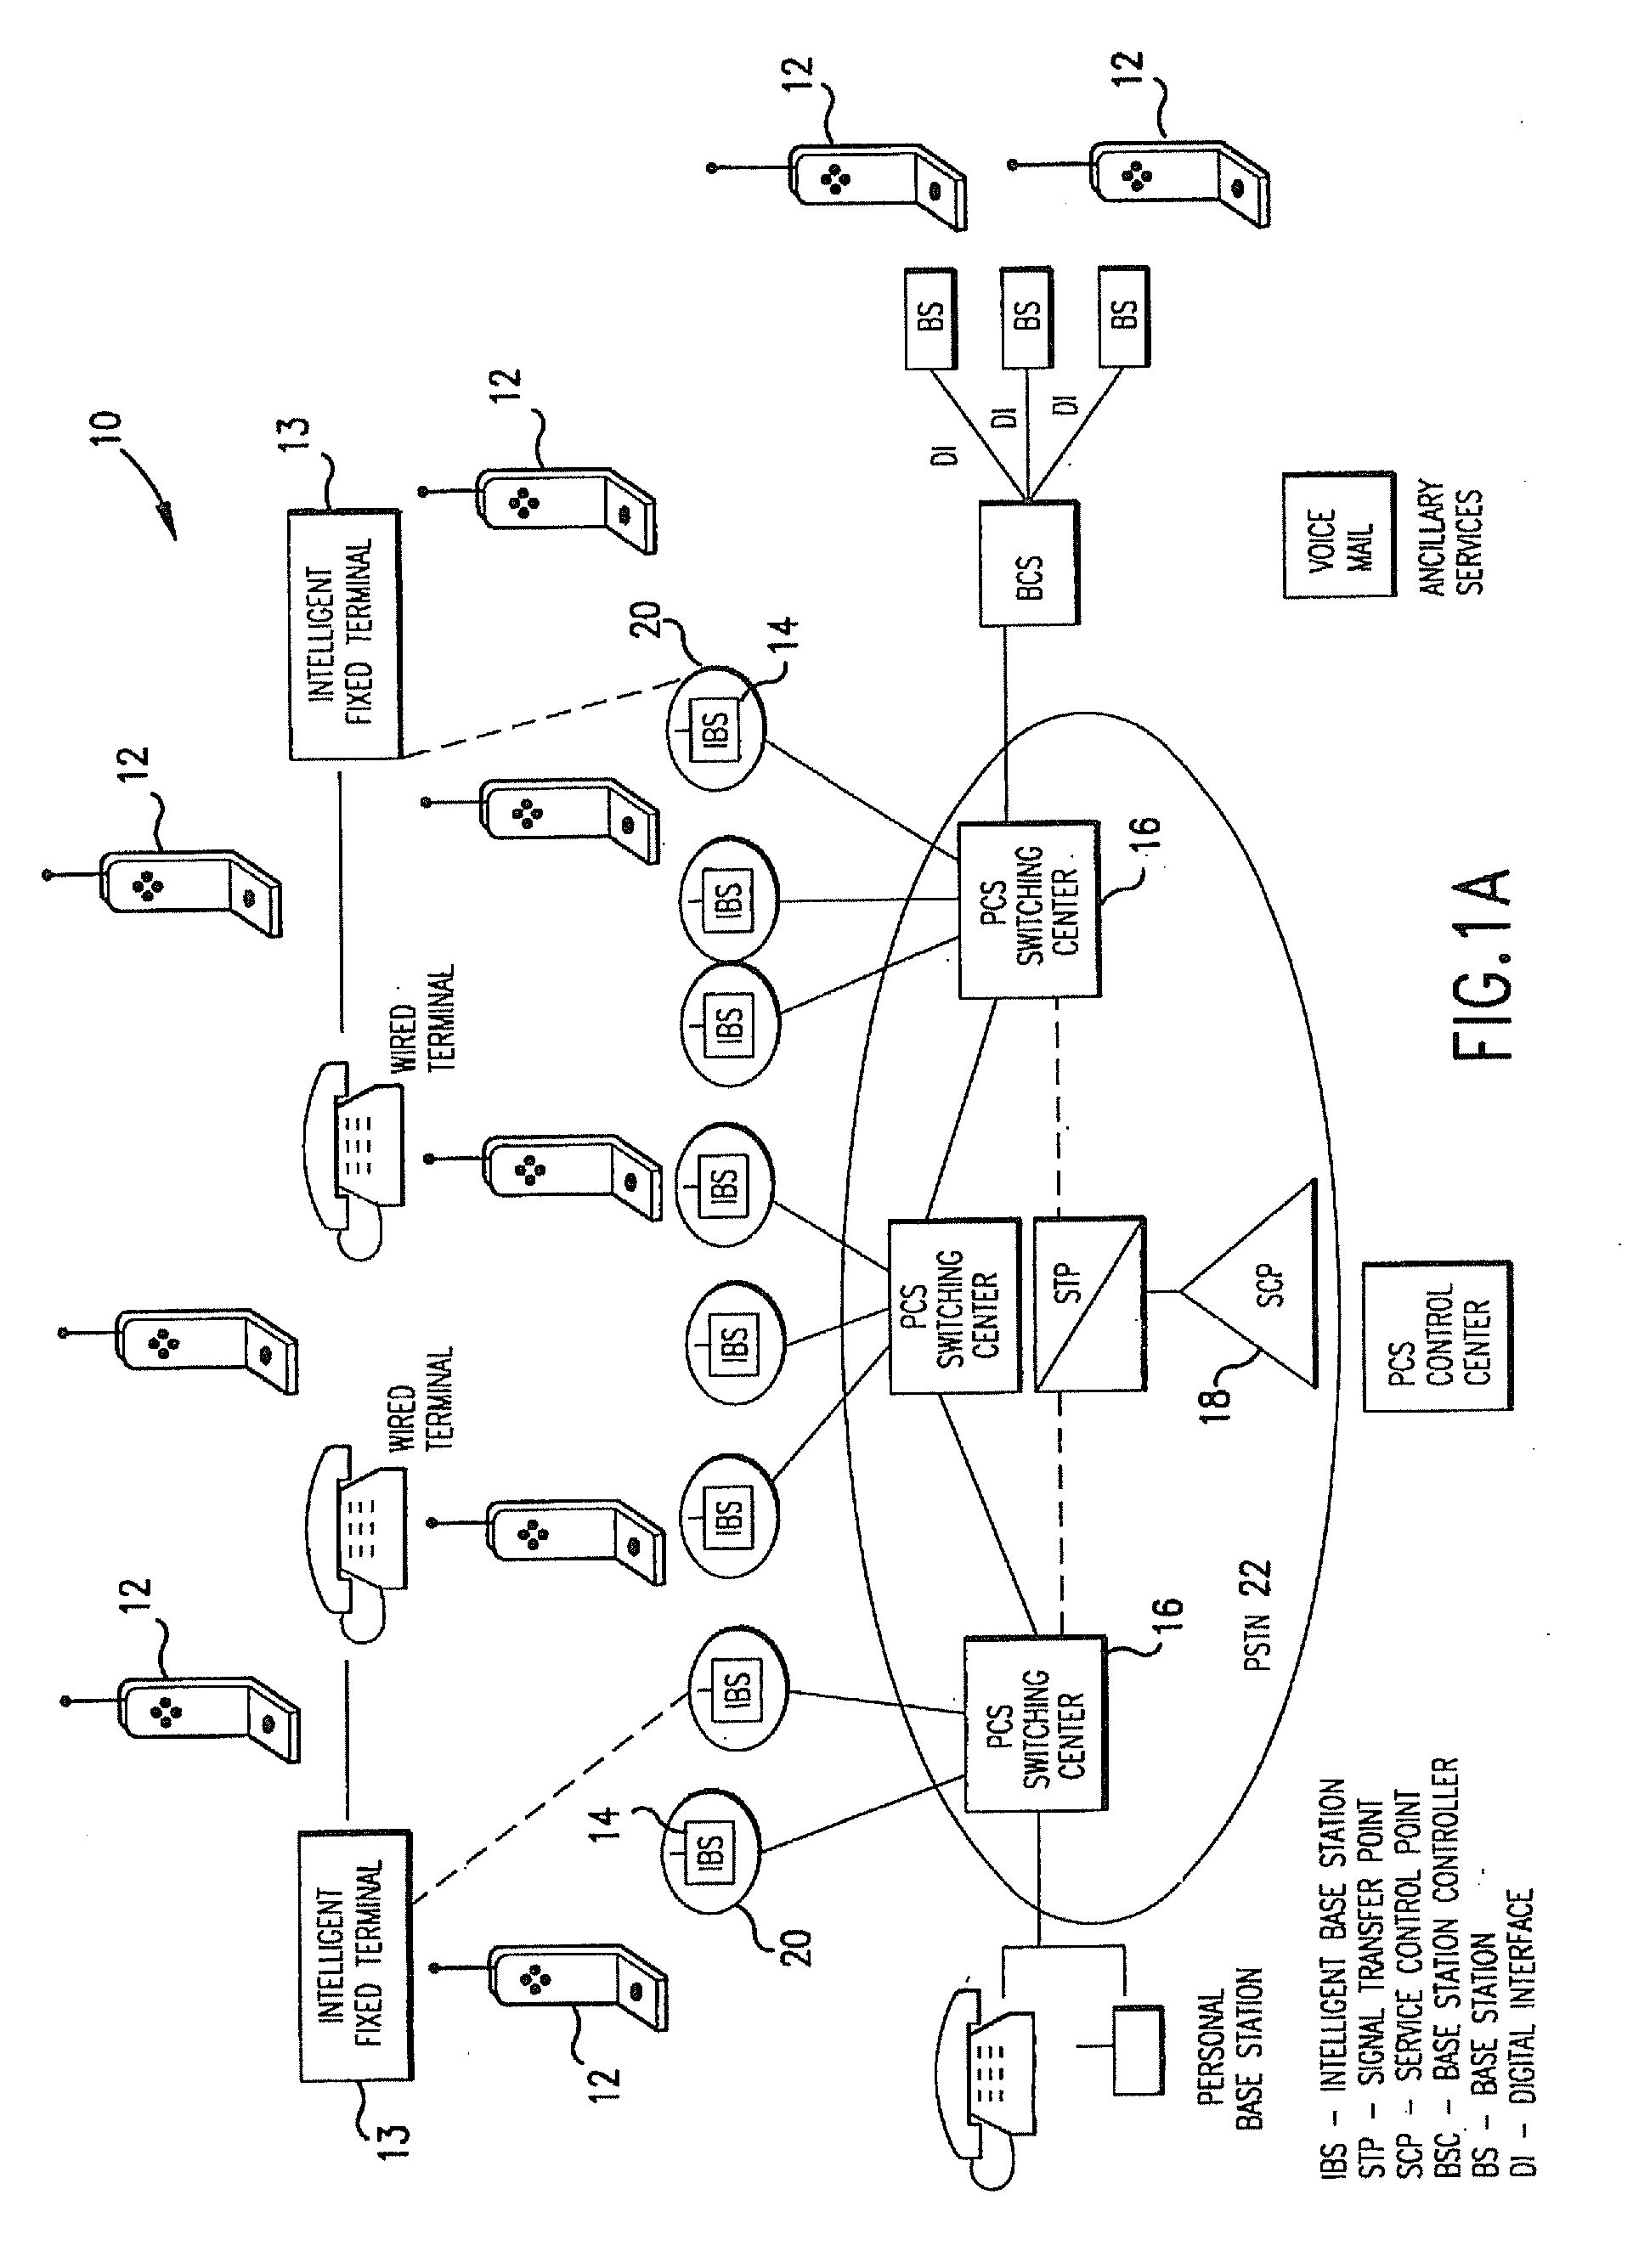 Wireless Digital Personal Communications System Having Voice/Data/Image Two-Way Calling and Intercell Hand-Off Provided Through Distributed Logic Resident in Portable Handset Terminals, Fixed Terminals, Radio Cell Base Stations and Switched Telephone Network